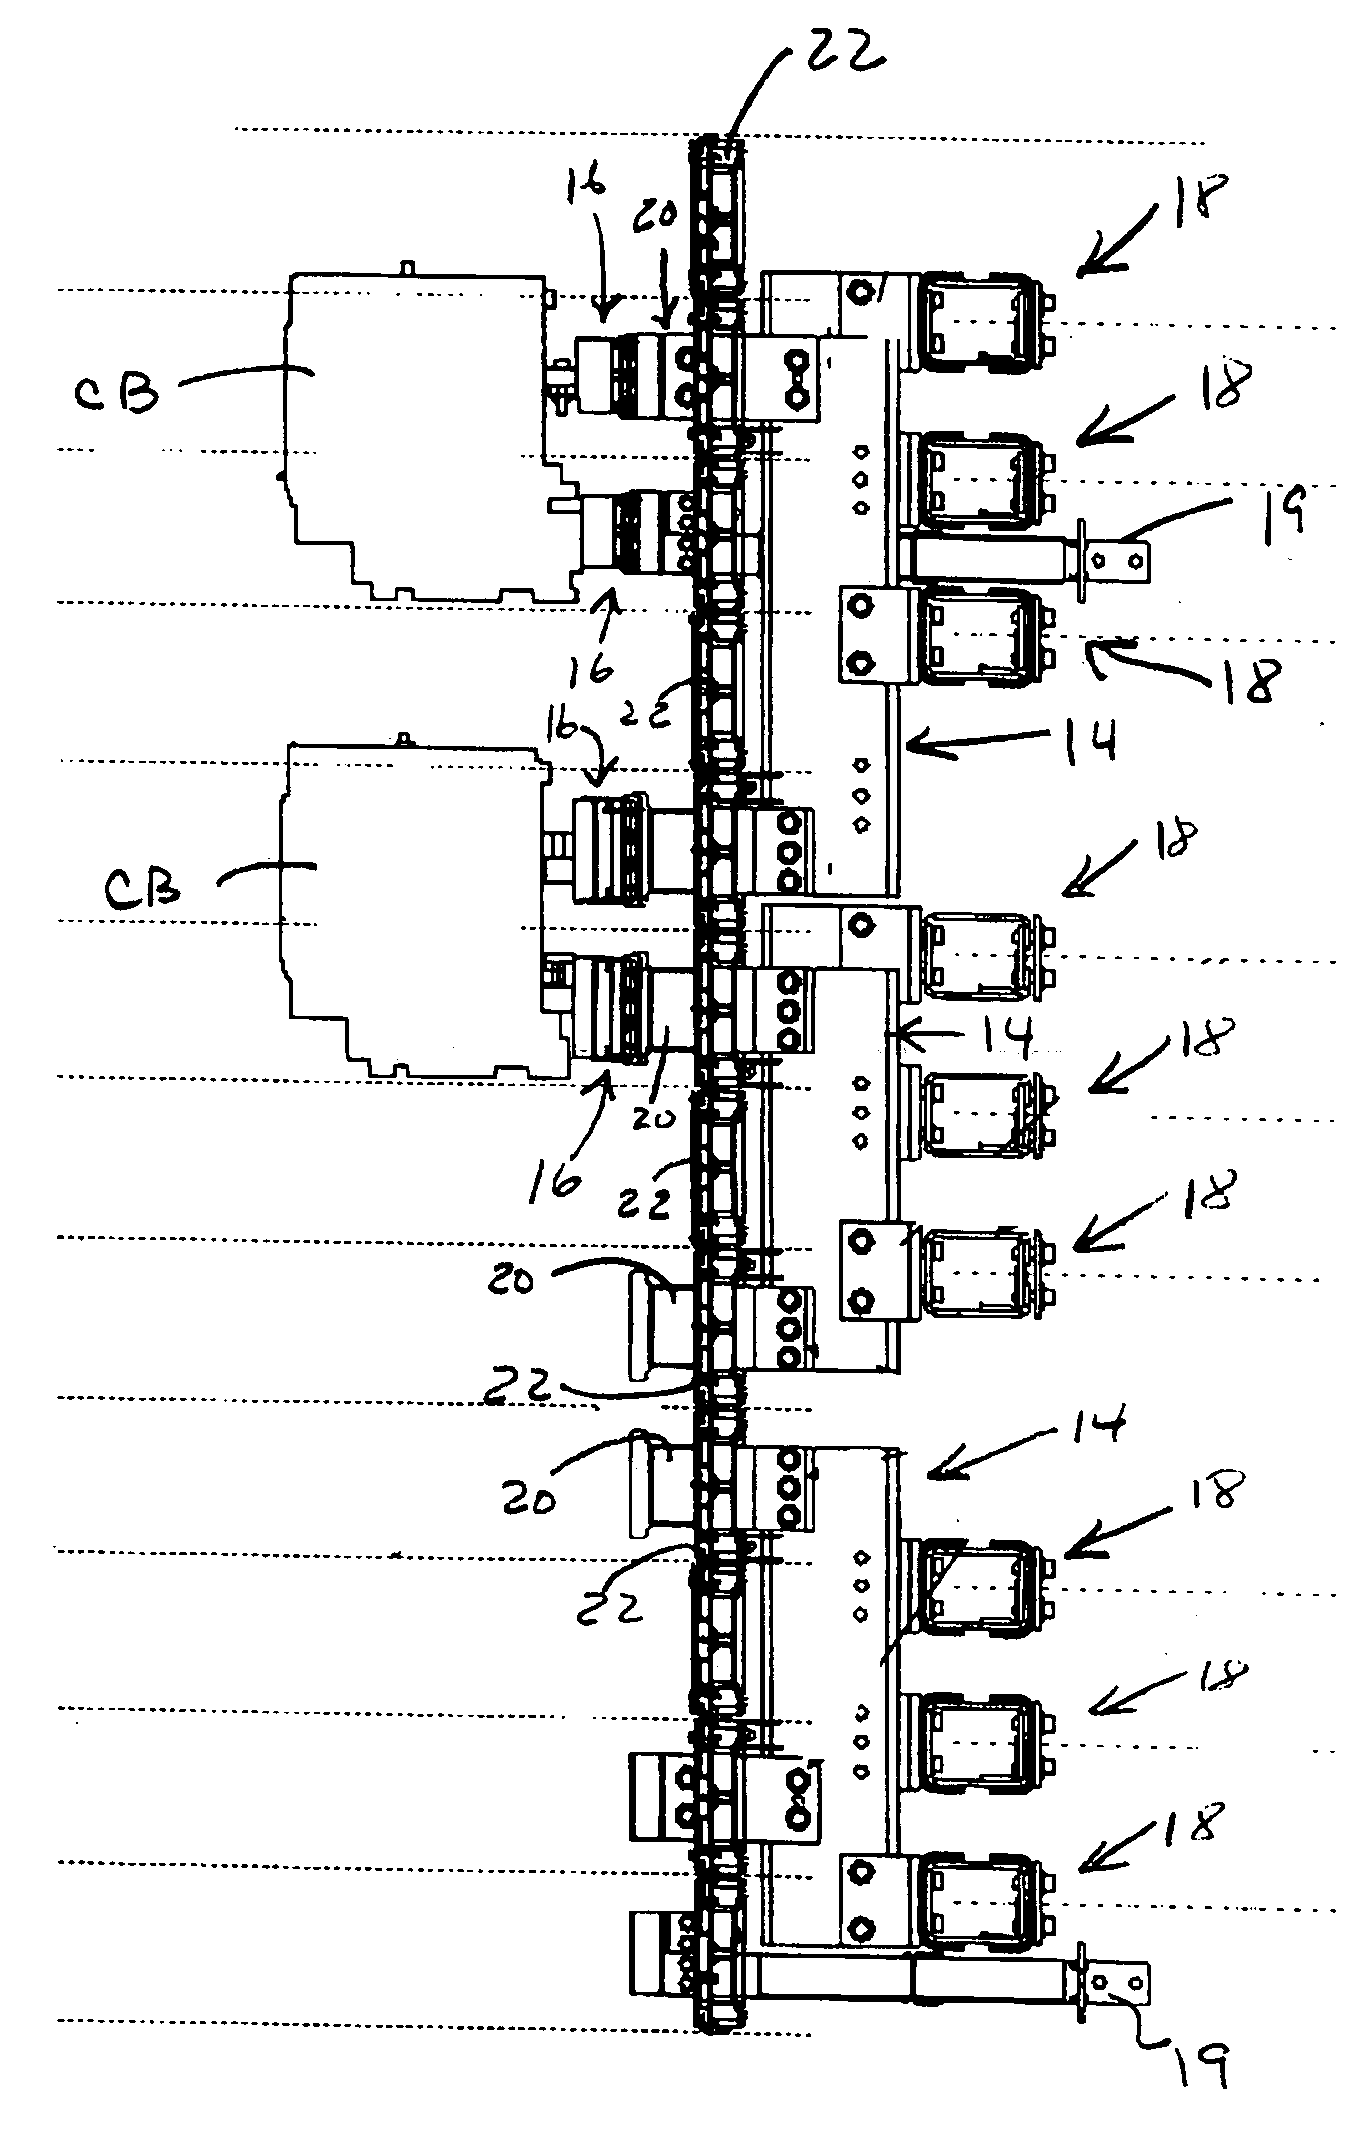 Electric phase bus bar